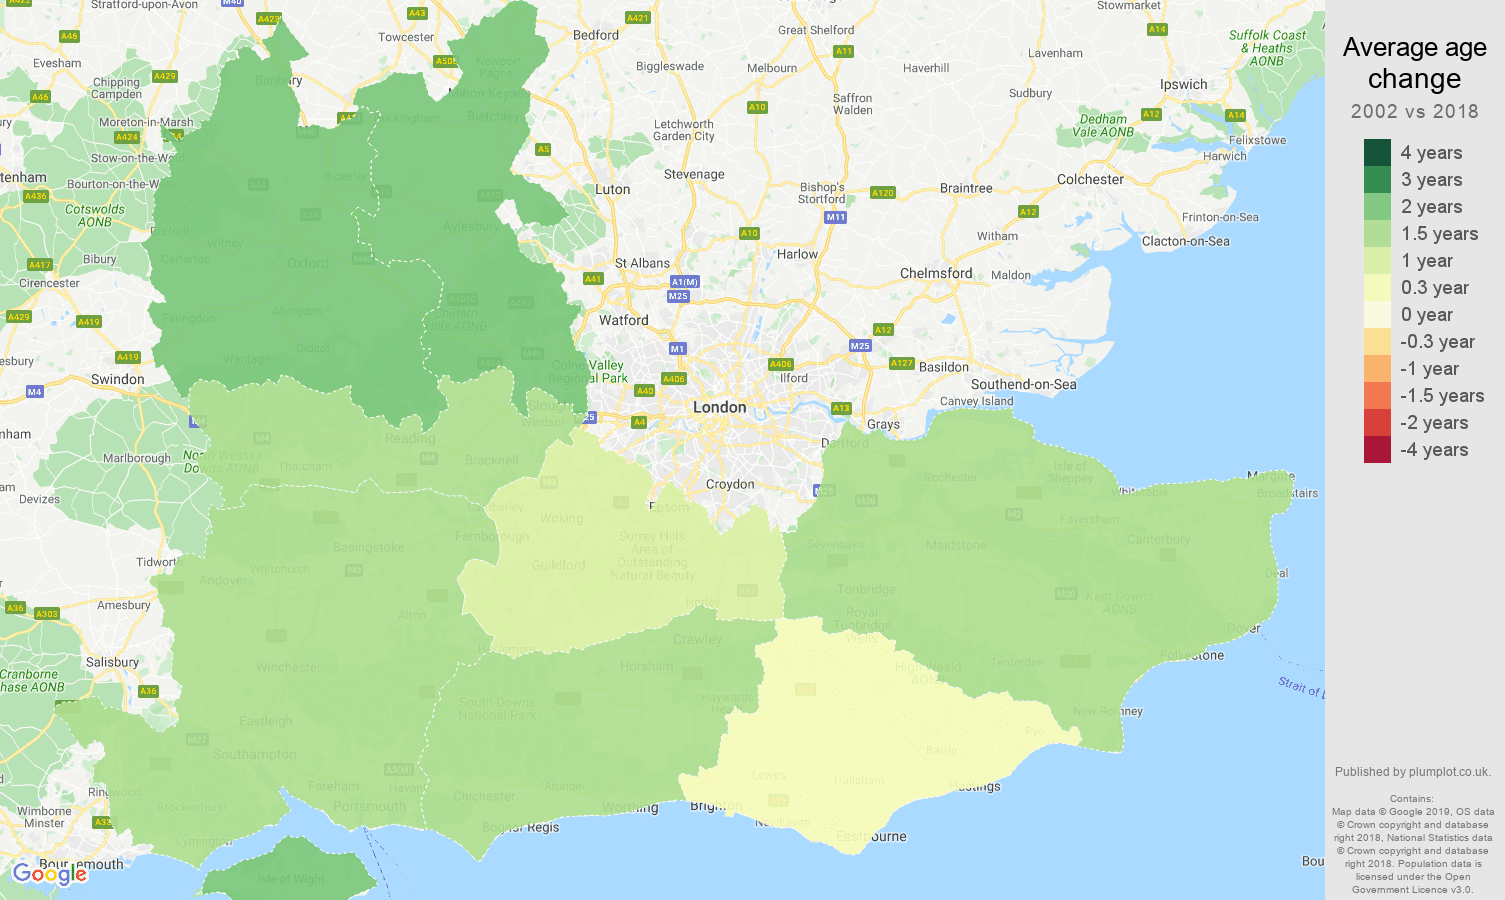 South East average age change map